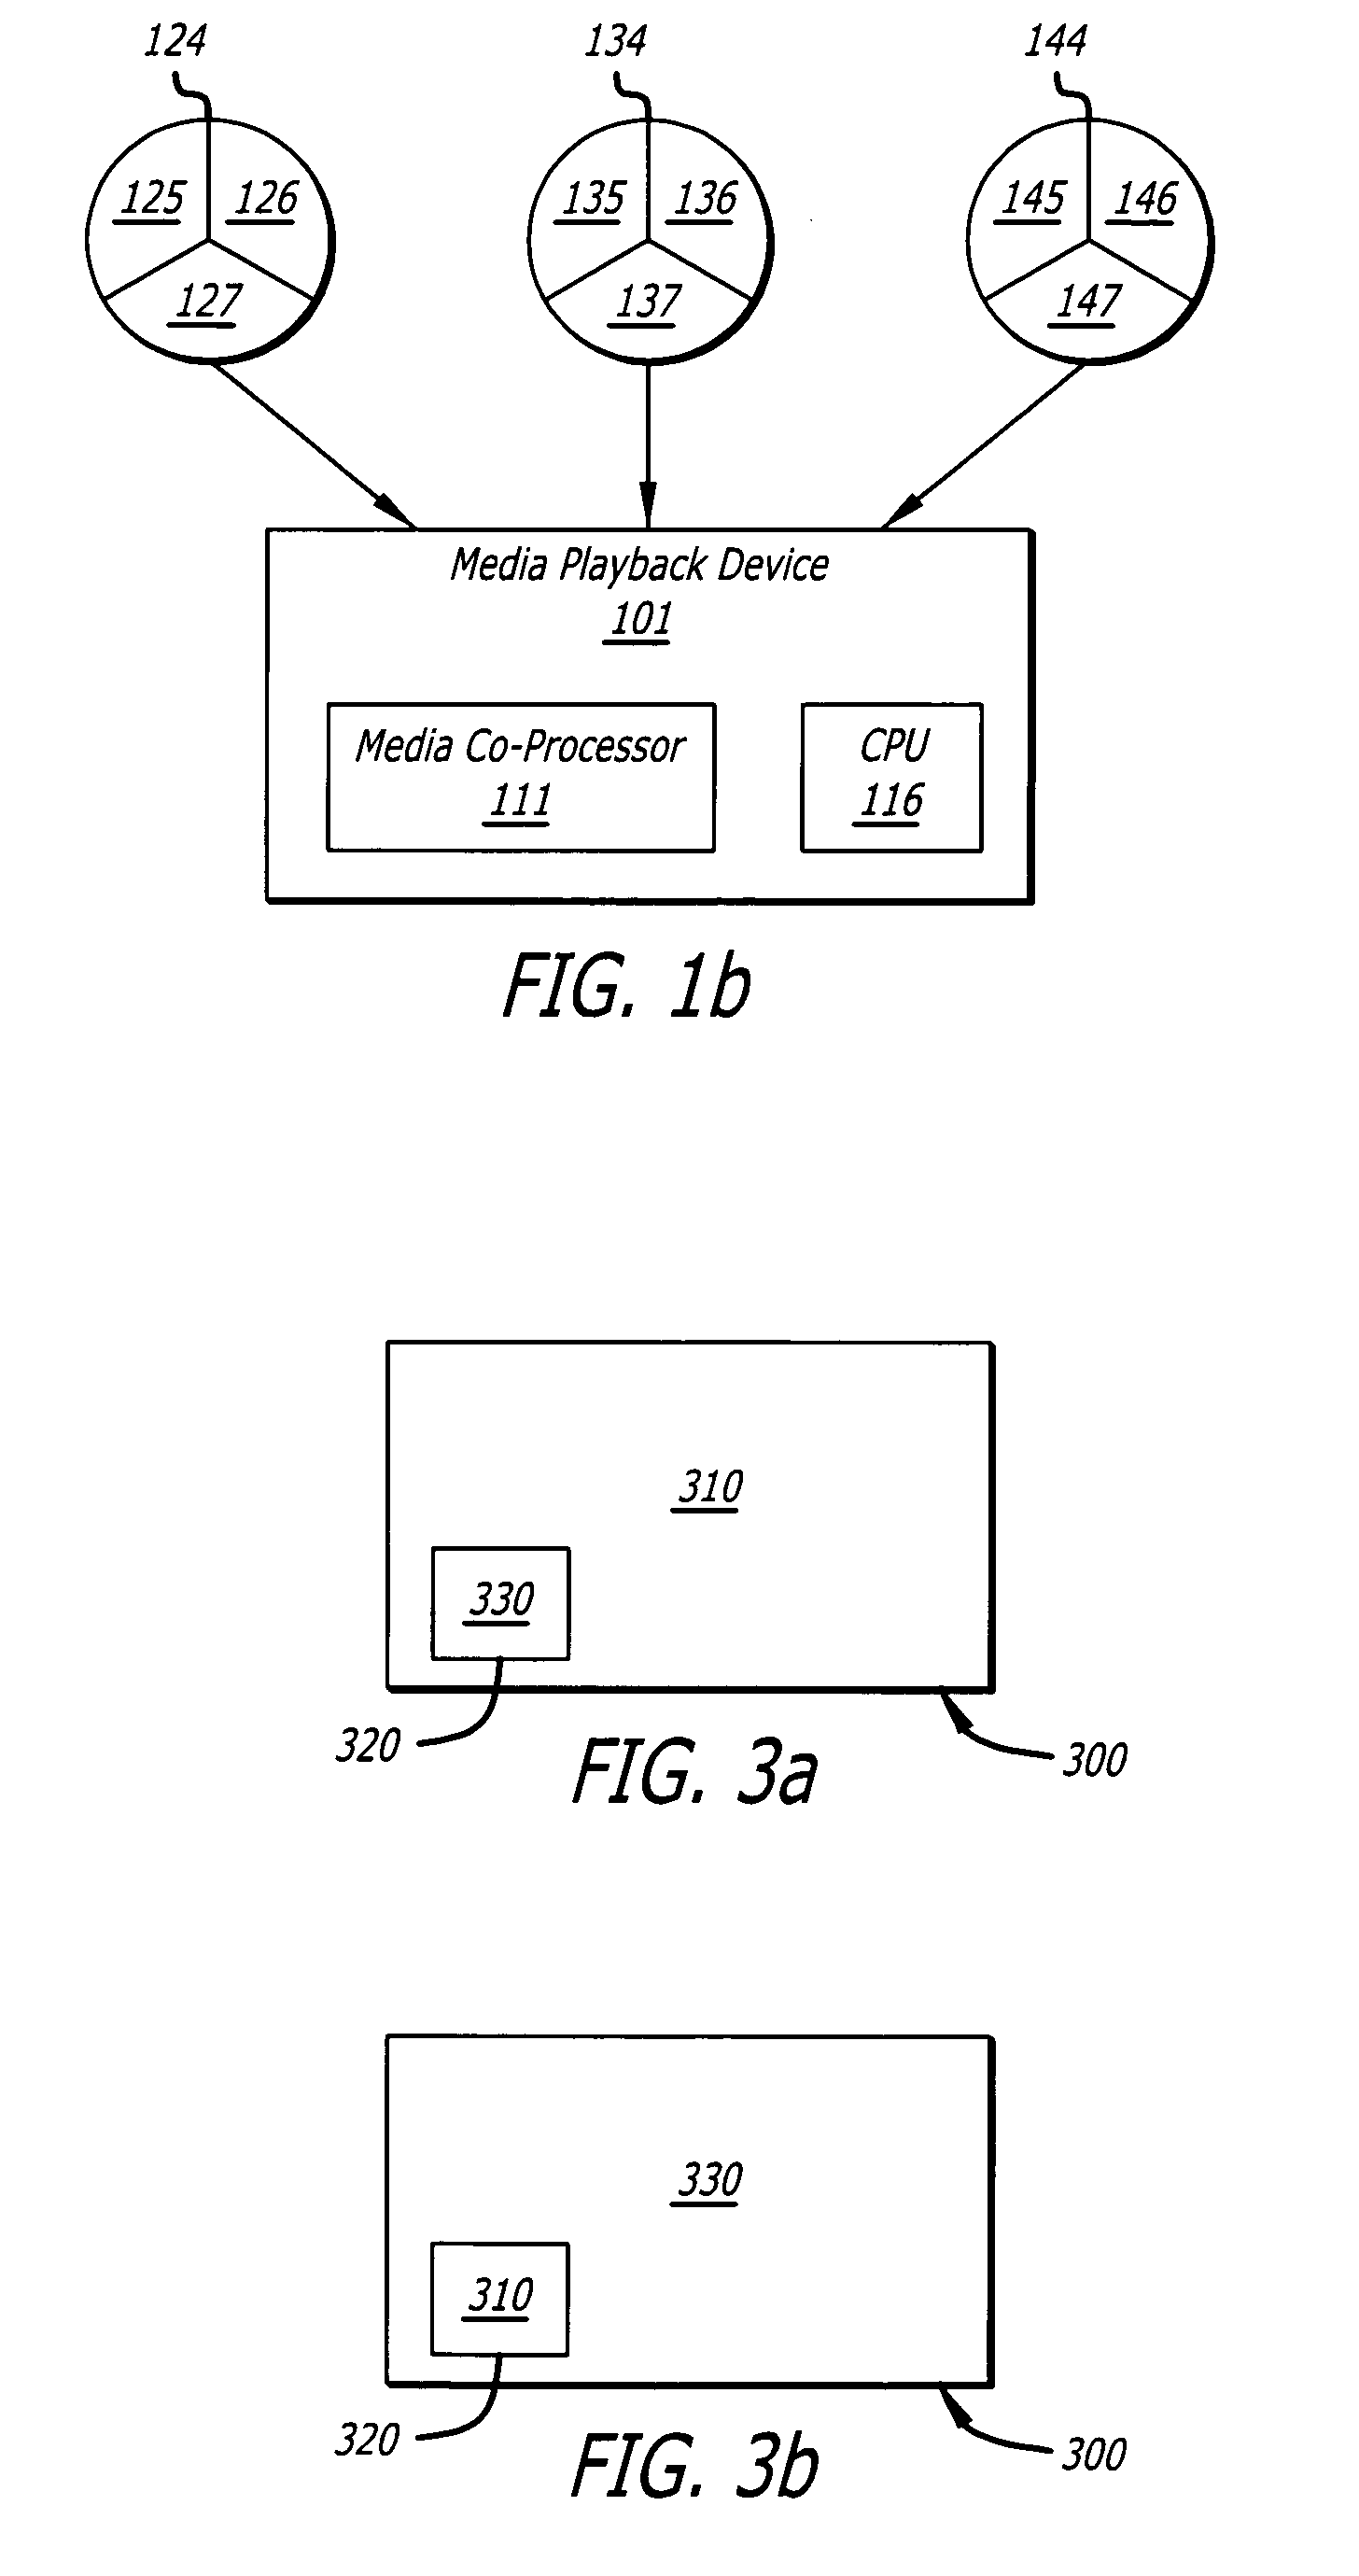 System and method of programmatic window control for consumer video players